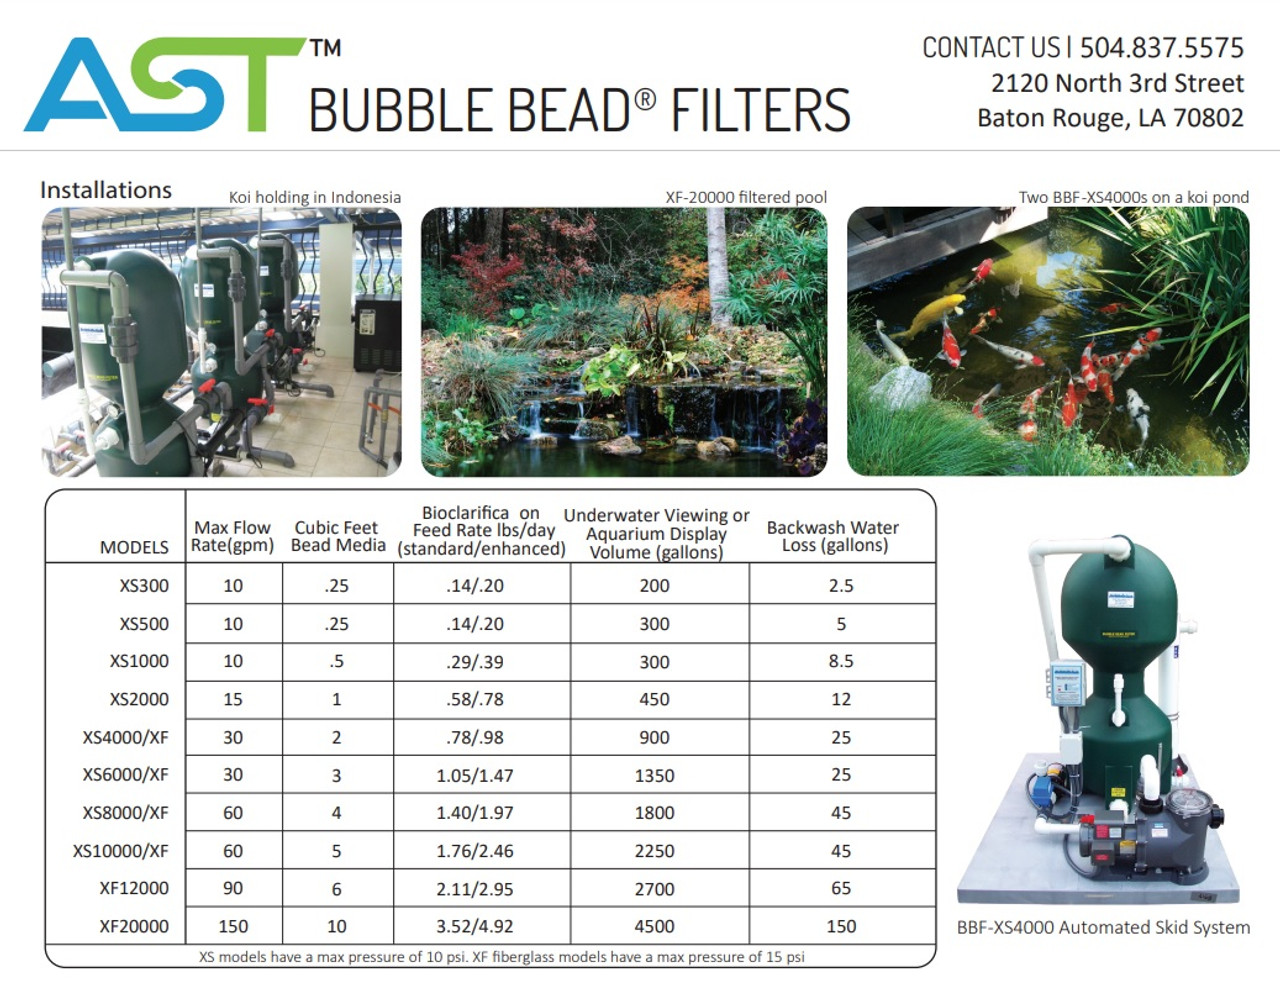 AST Bubble-Washed BBF-XS300 Bead Filter - up to 10 gpm